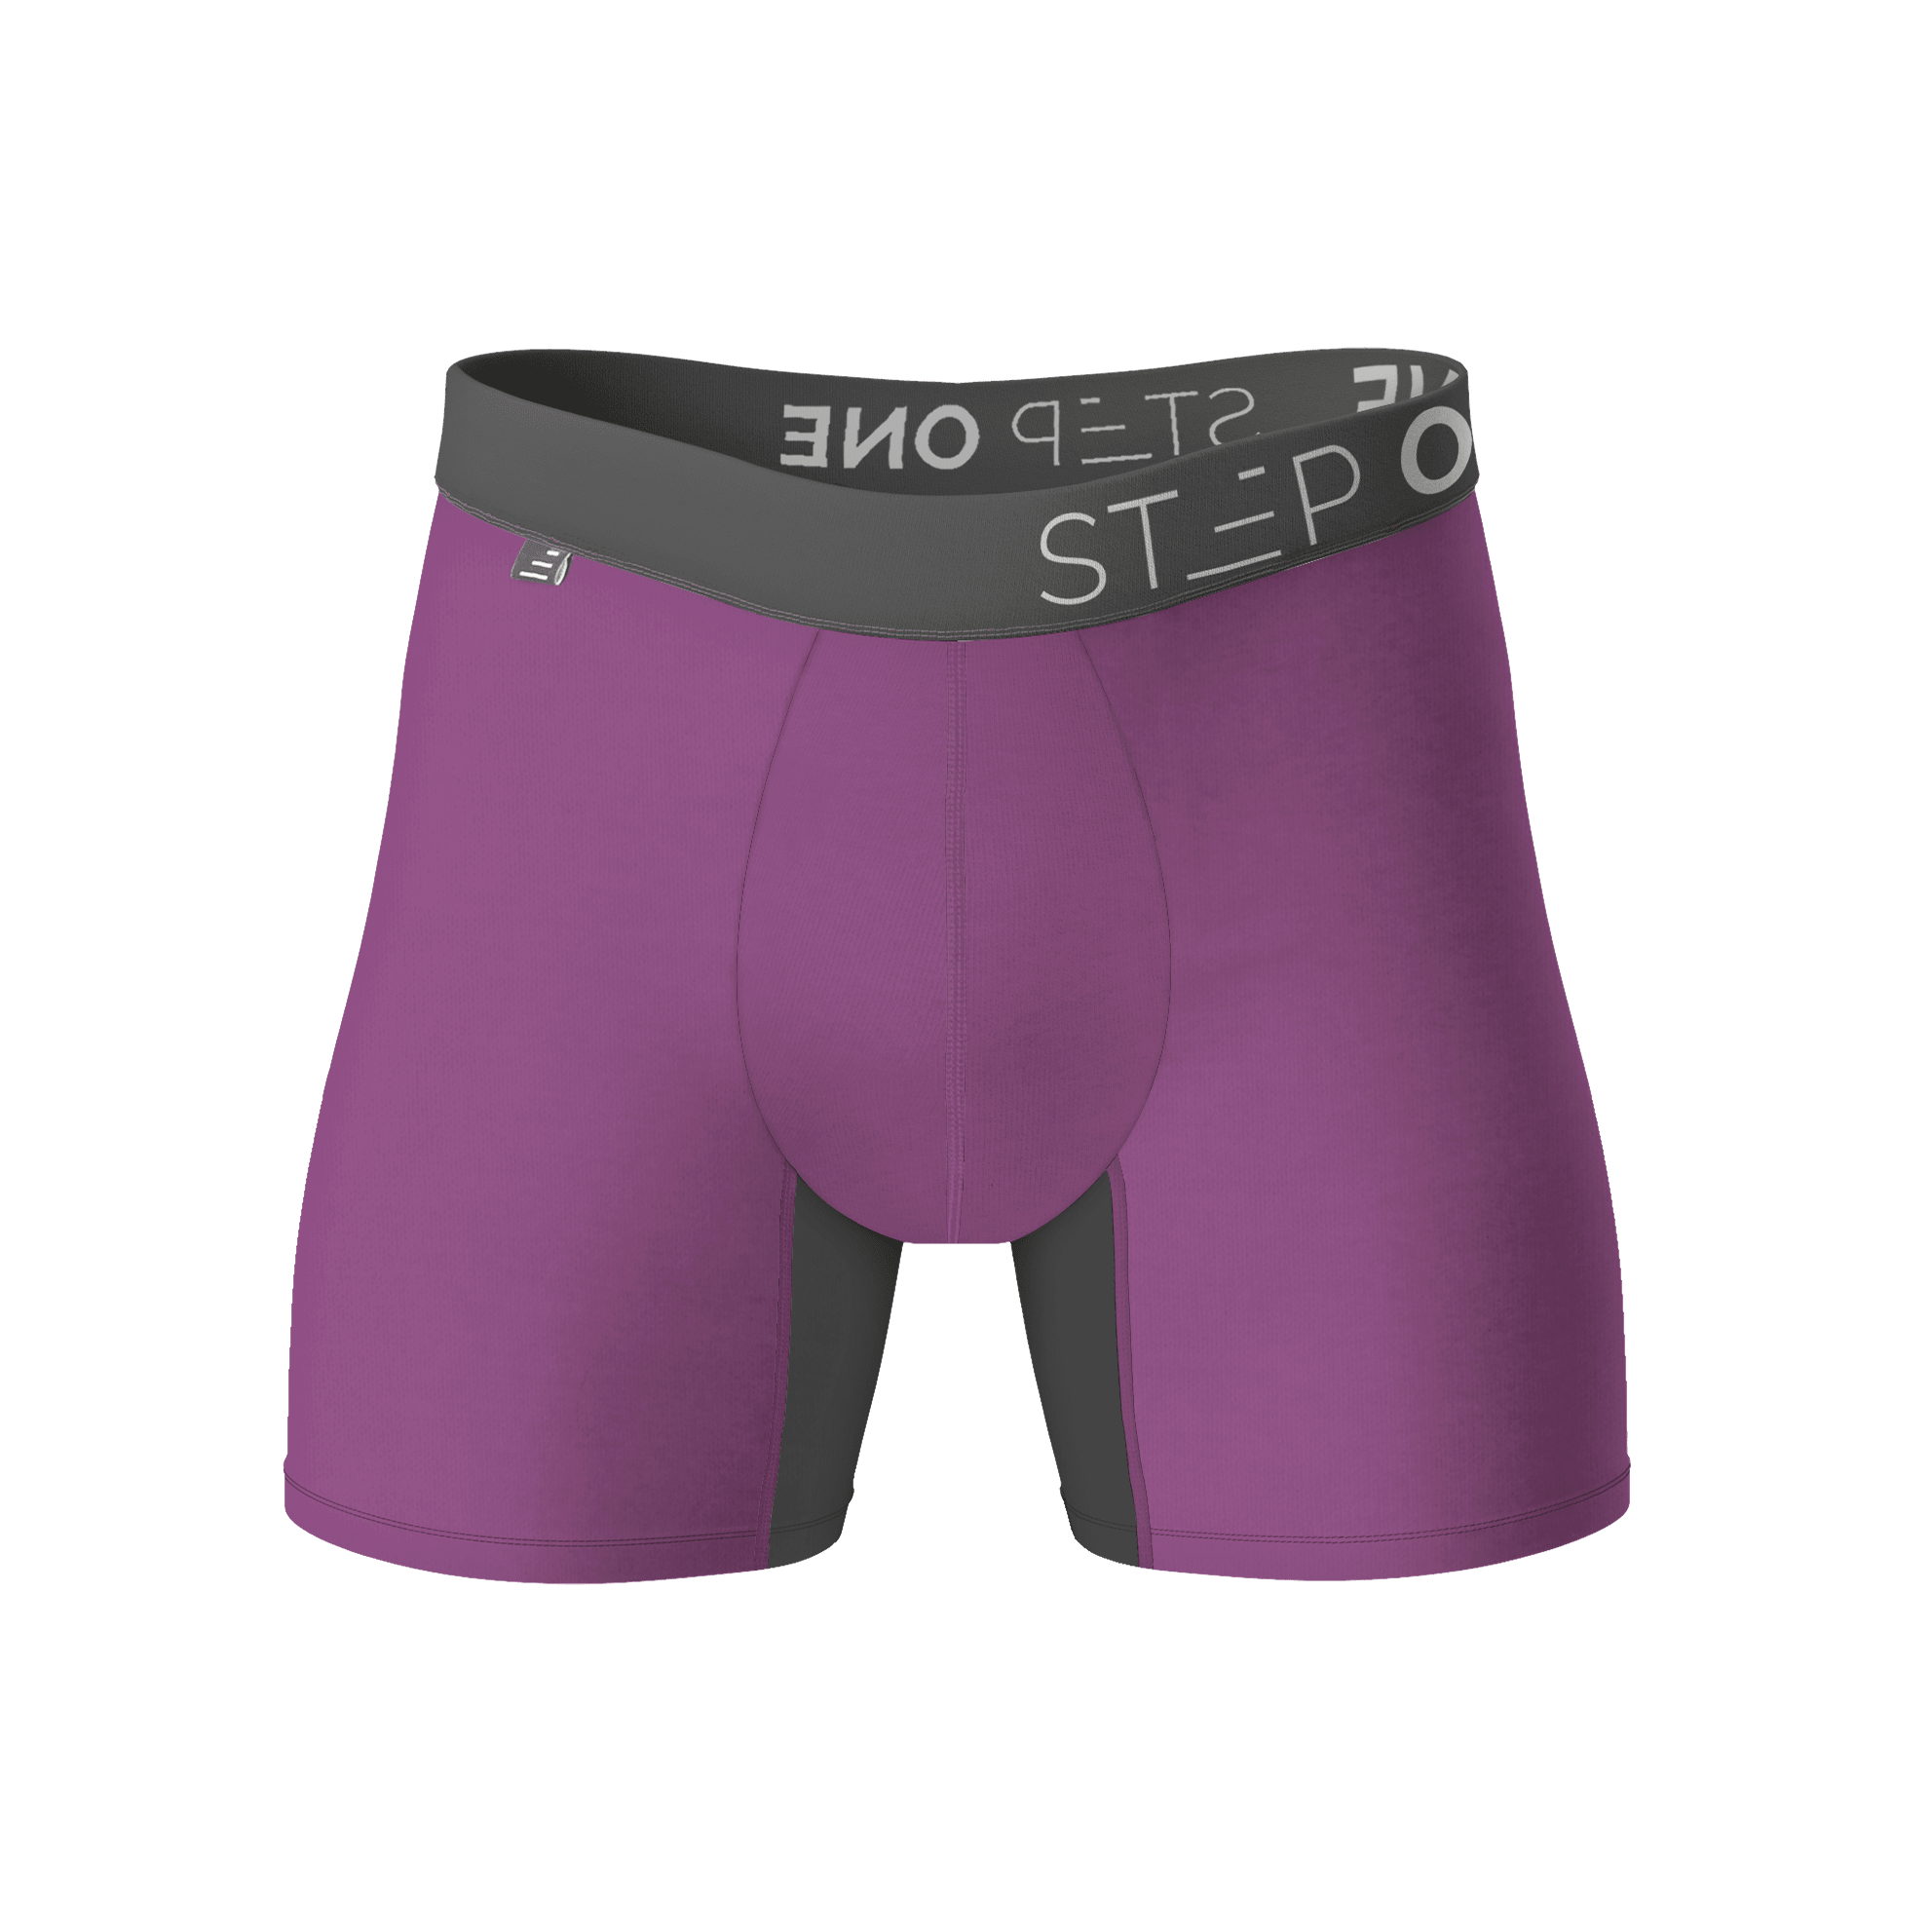 Anti-Chafe Bamboo Boxer Briefs - Breathable Men's Underwear with Chafe  Resistance